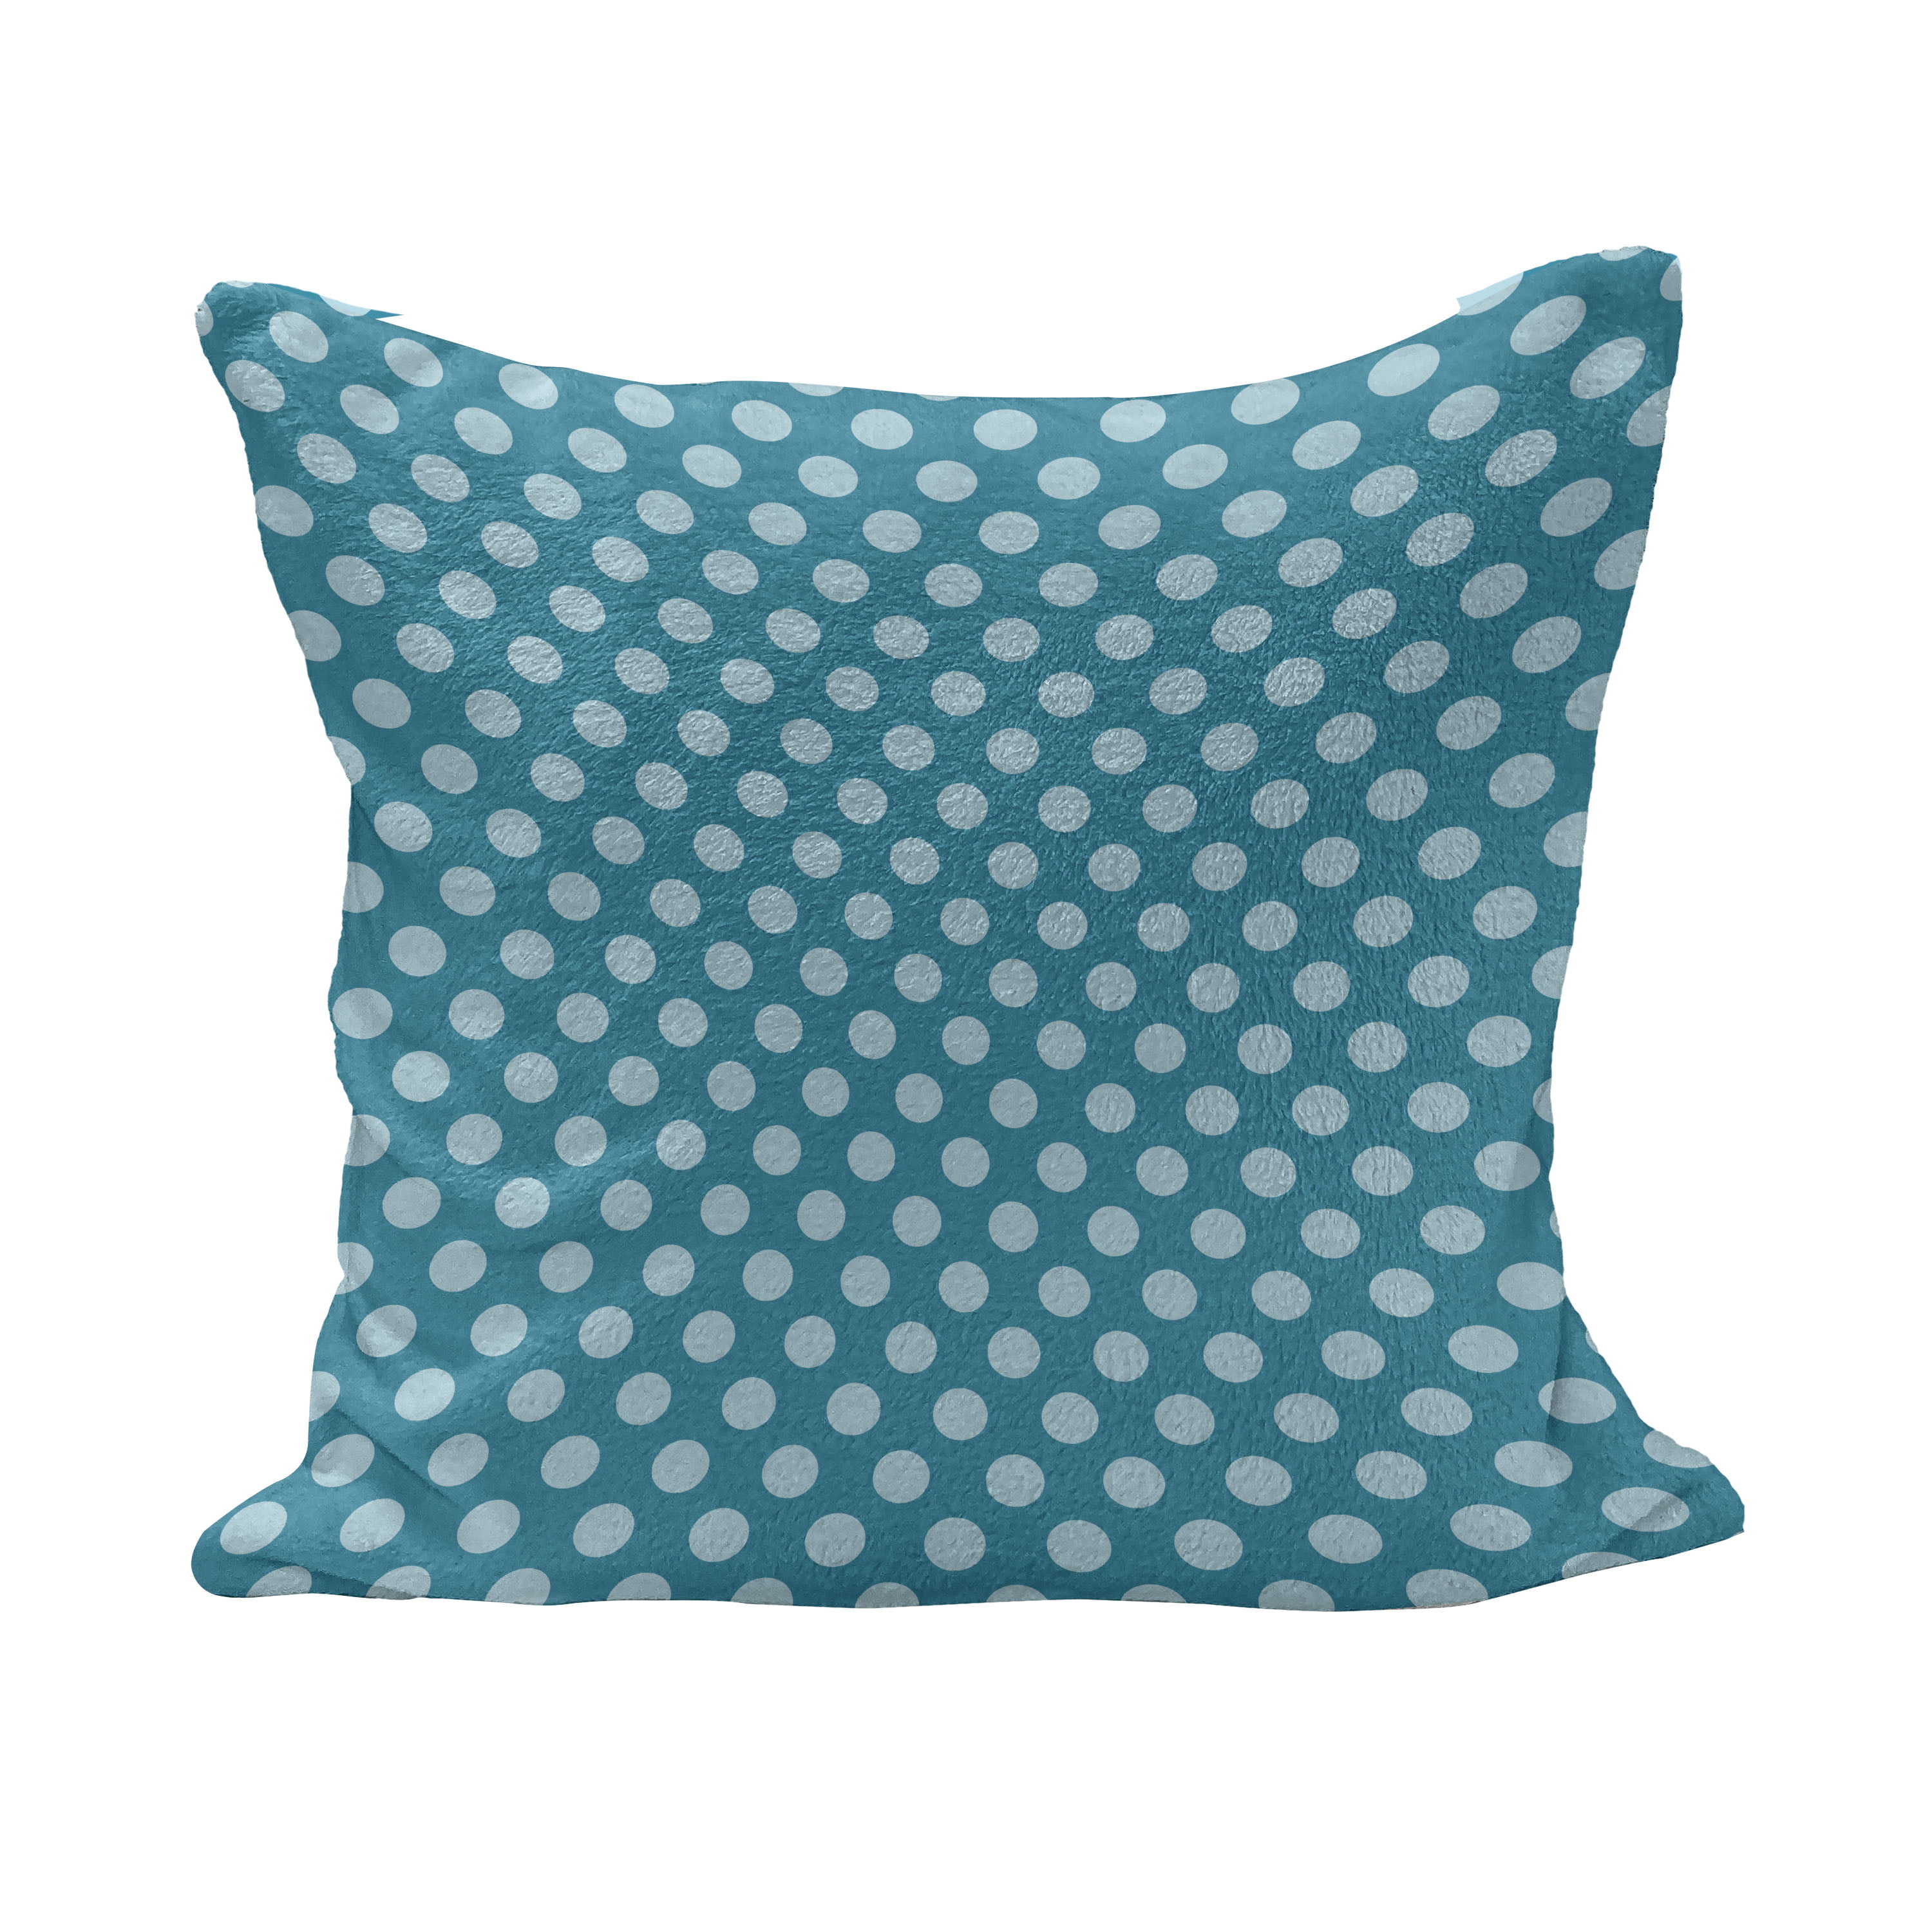 Multicolor Design Minds Boutique Black and White Polka Dot Spots Throw Pillow 18x18